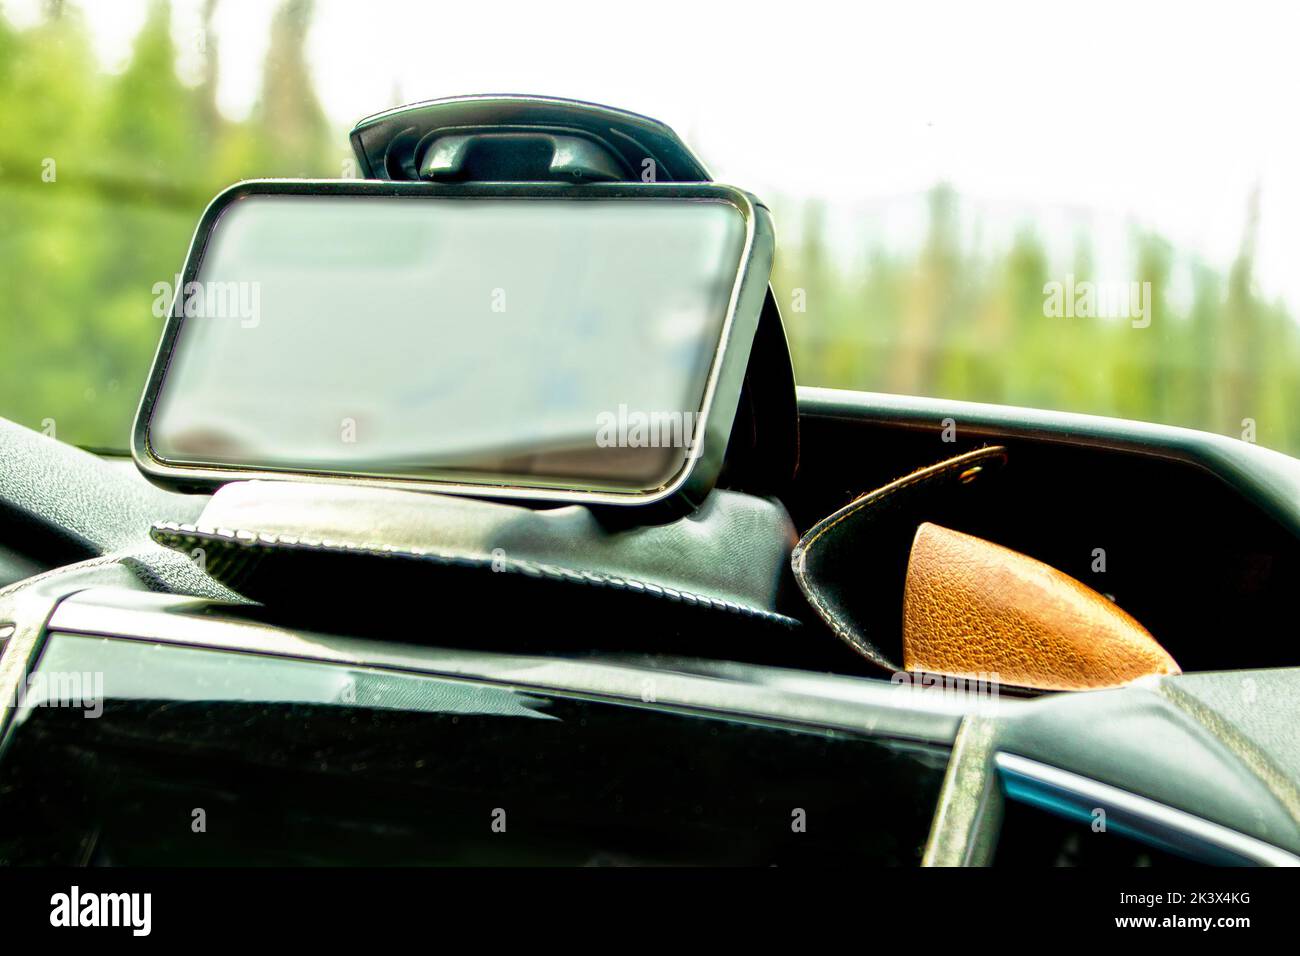 Mobile phone in a weighted clamshell clamp and sunglasses case on dashboard of vehicle with blurred trees in windshield - Soft focus Stock Photo